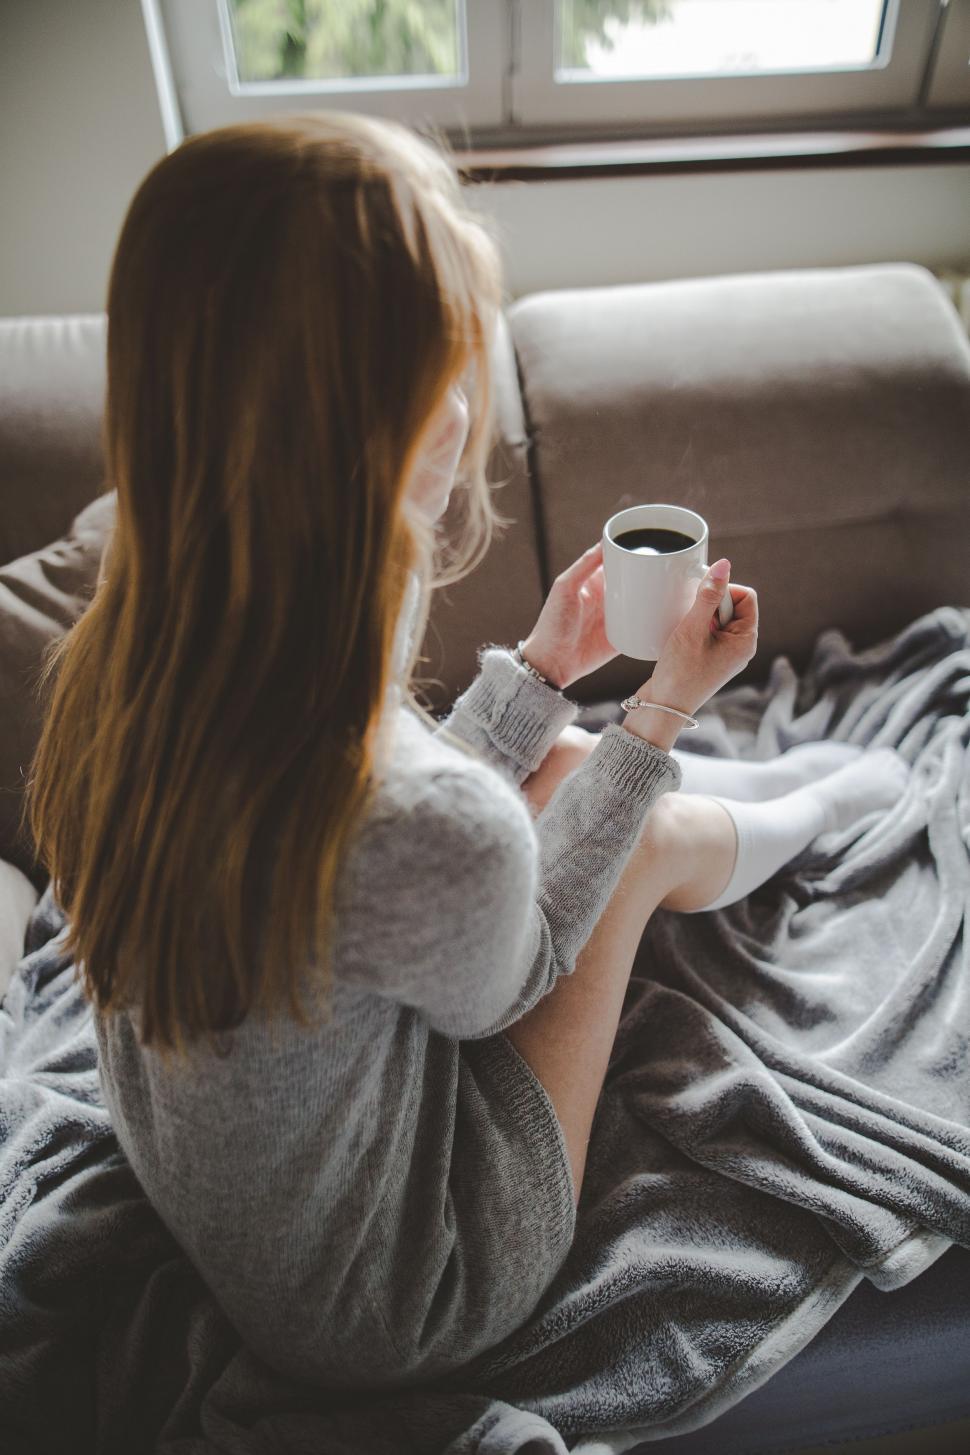 Free Image of Woman Sitting on Couch Holding Cup of Coffee 